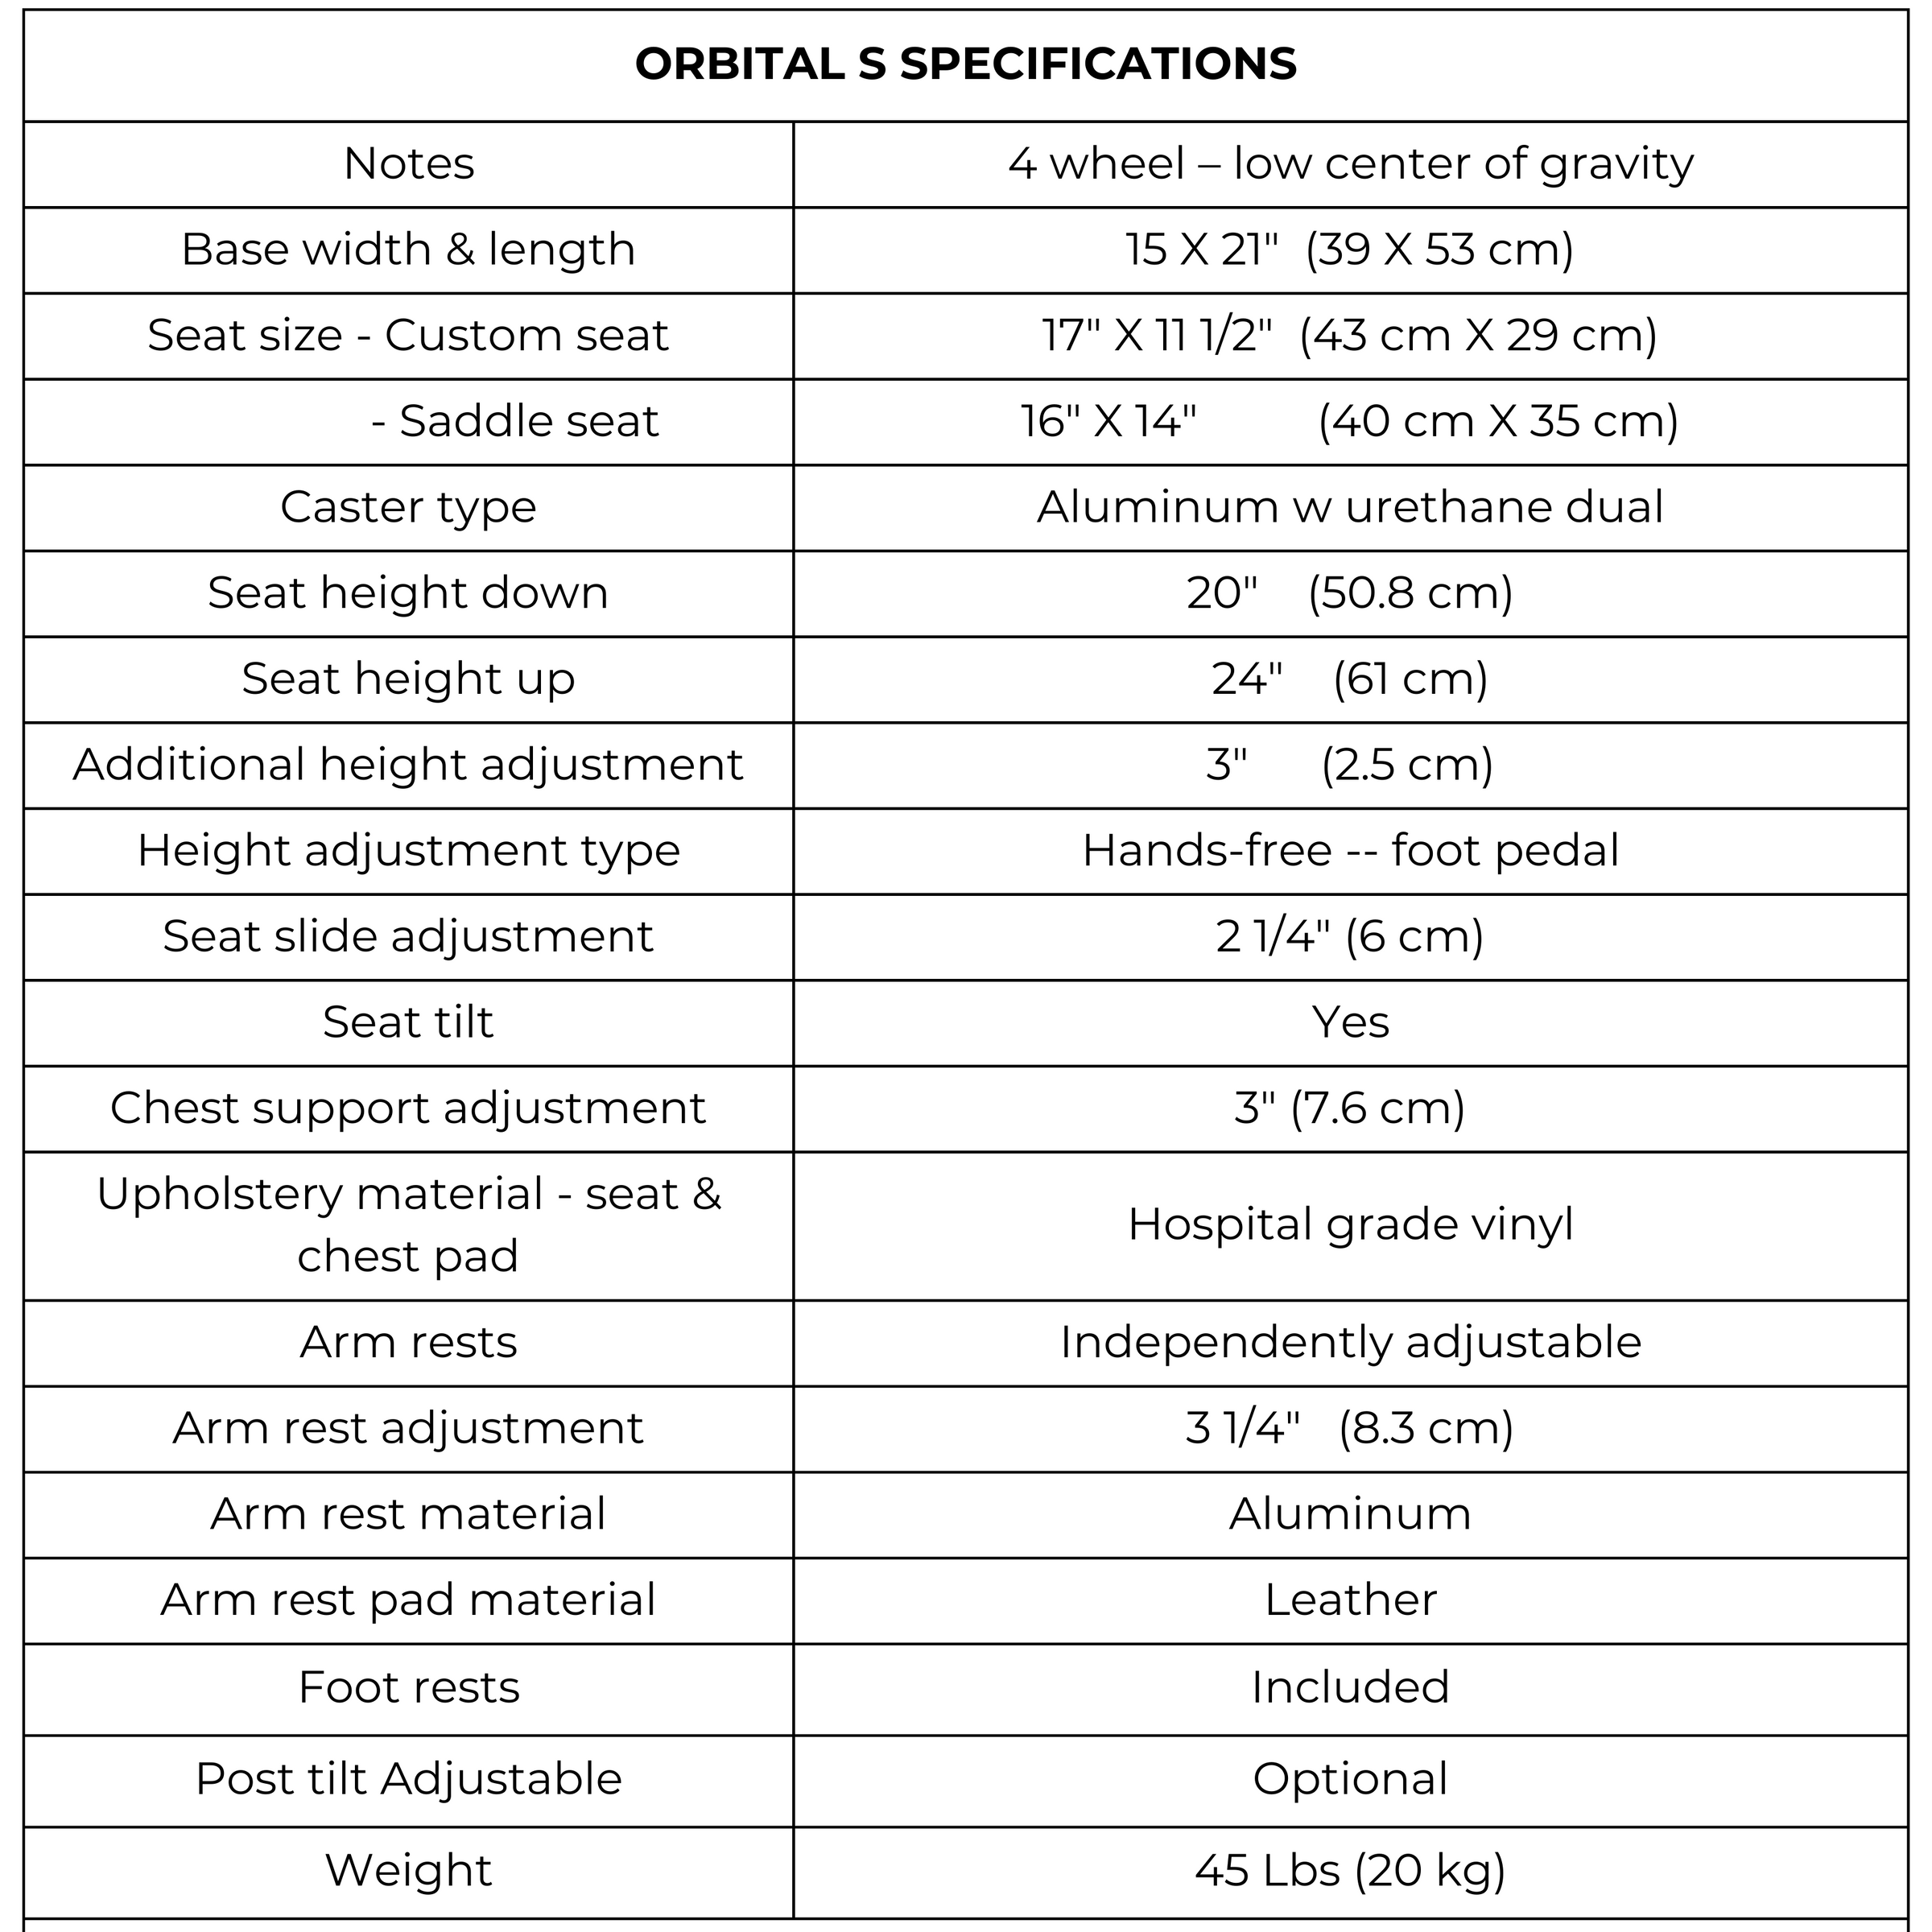 Orbital Surgical ergonomic doctor chair and stool specifications